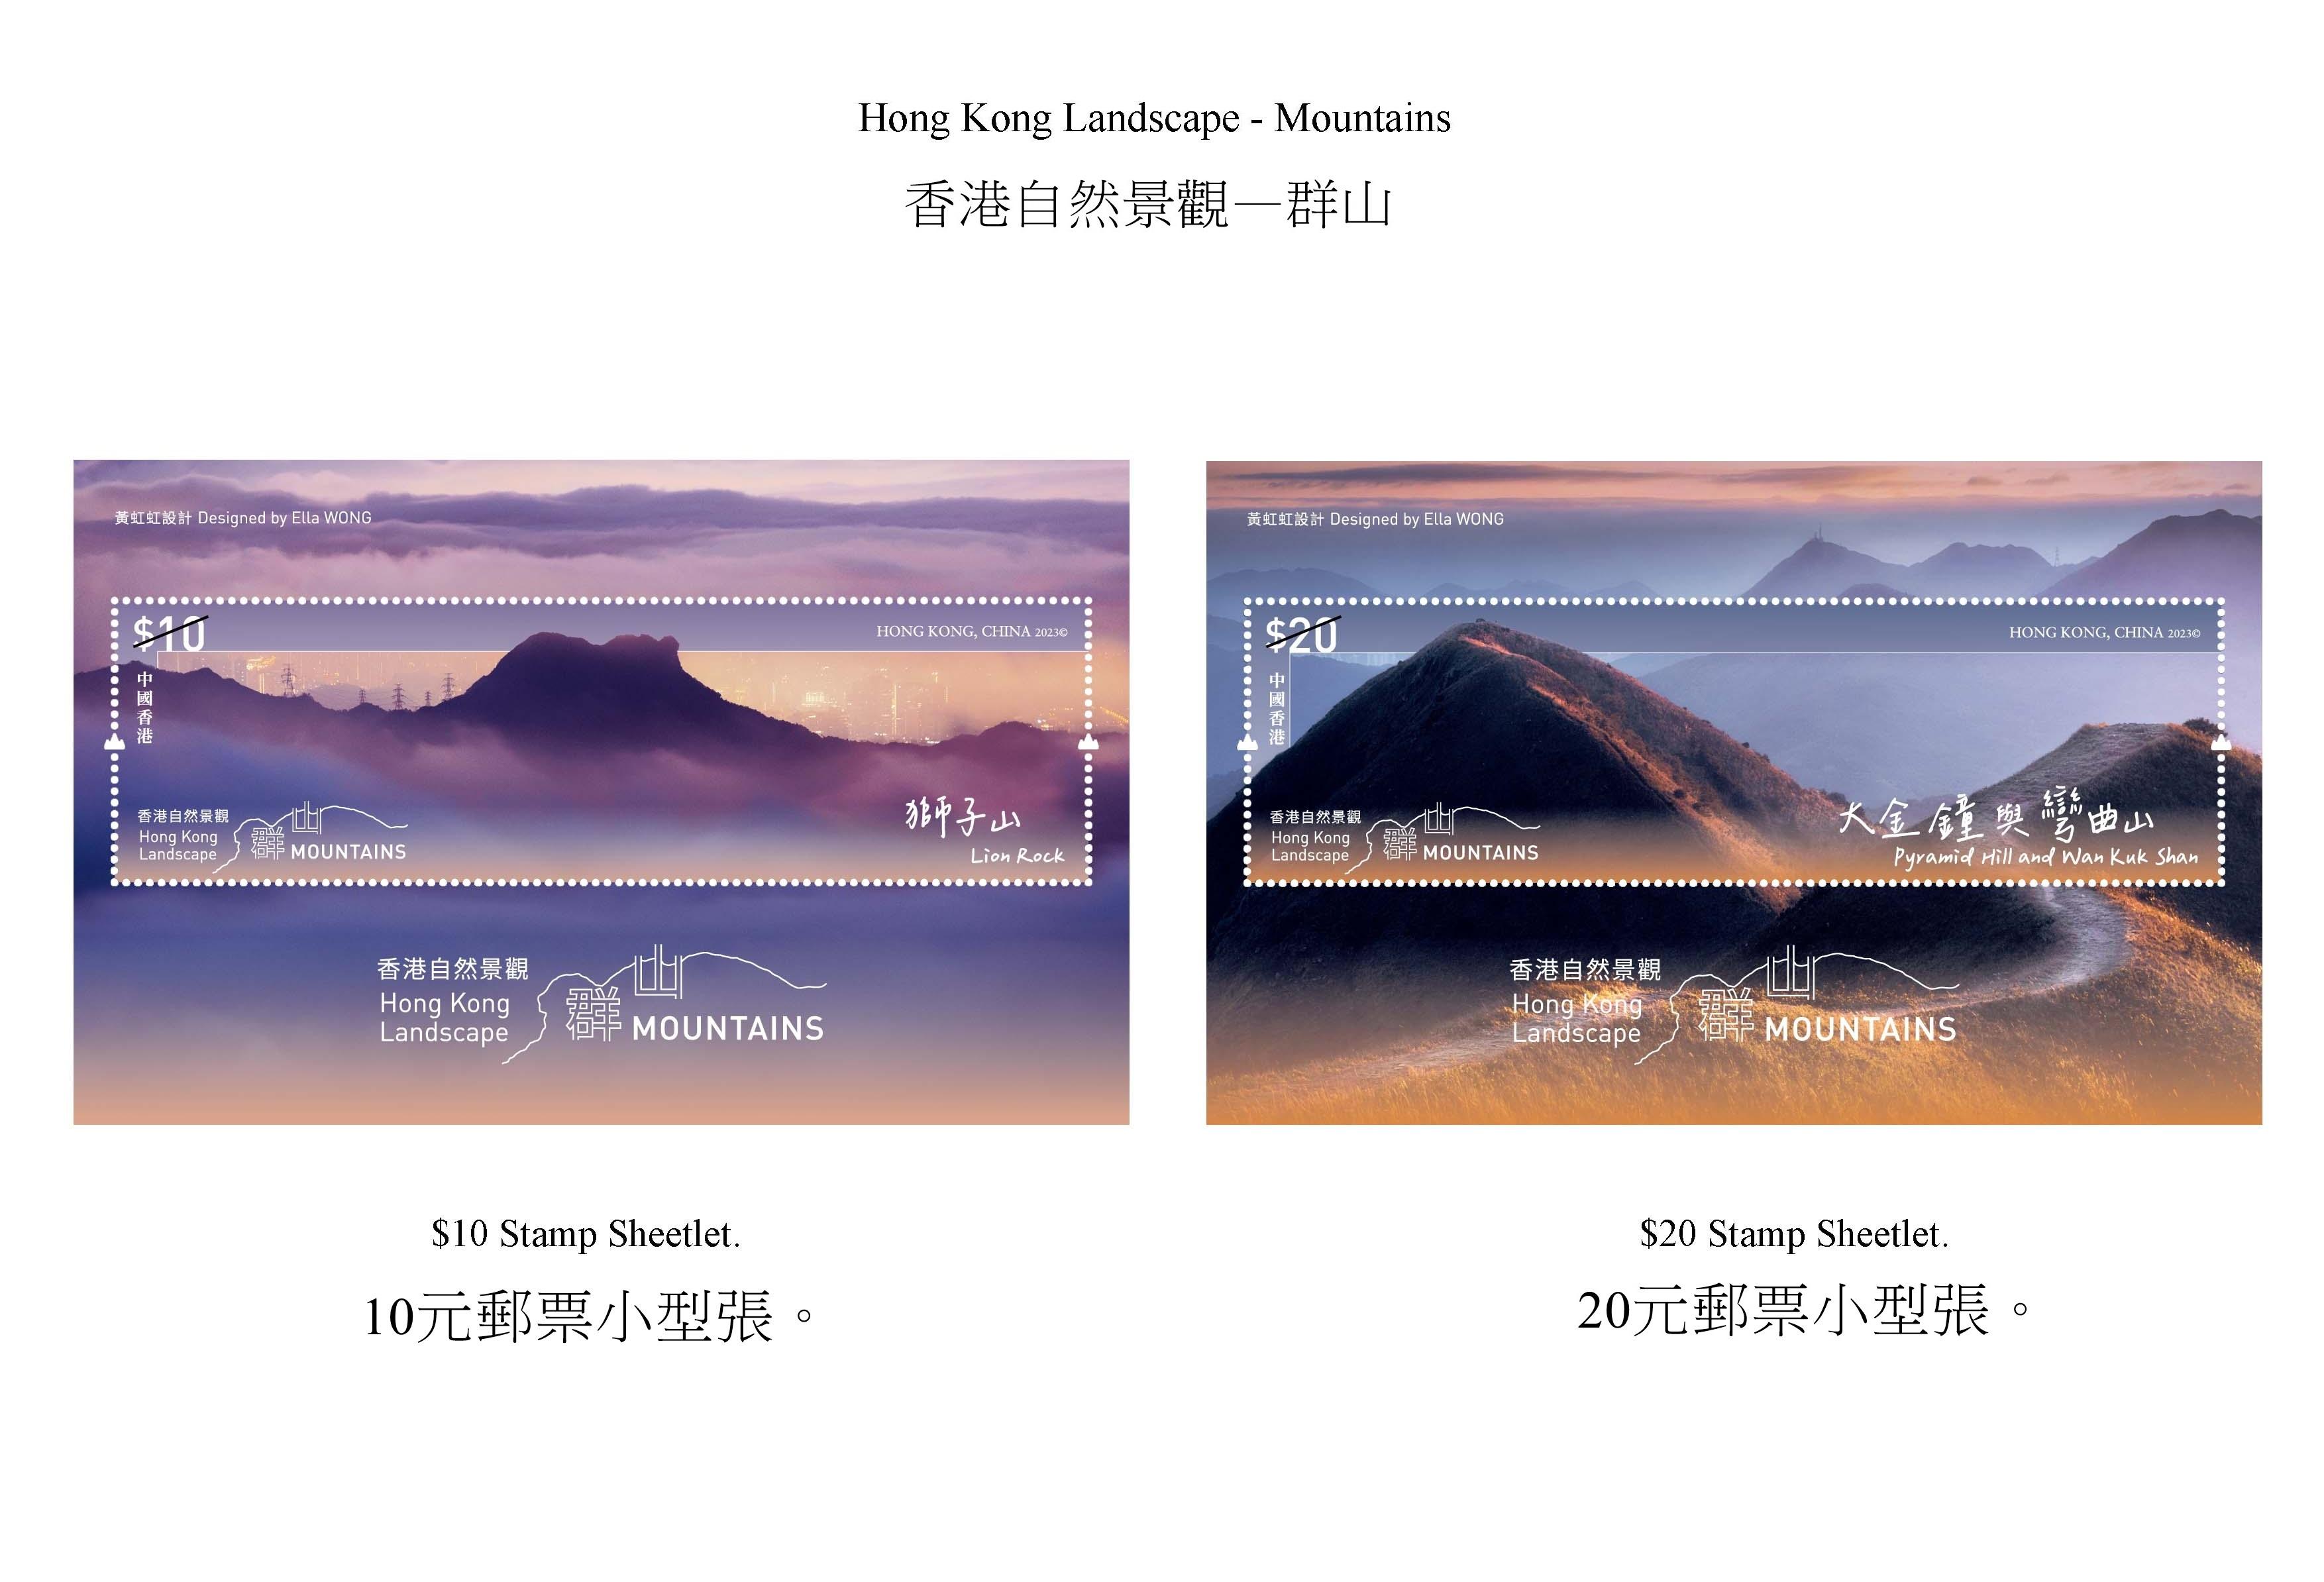 Hongkong Post will launch a special stamp issue and associated philatelic products on the theme of "Hong Kong Landscape - Mountains" on October 26 (Thursday). Photos show the stamp sheetlets.

